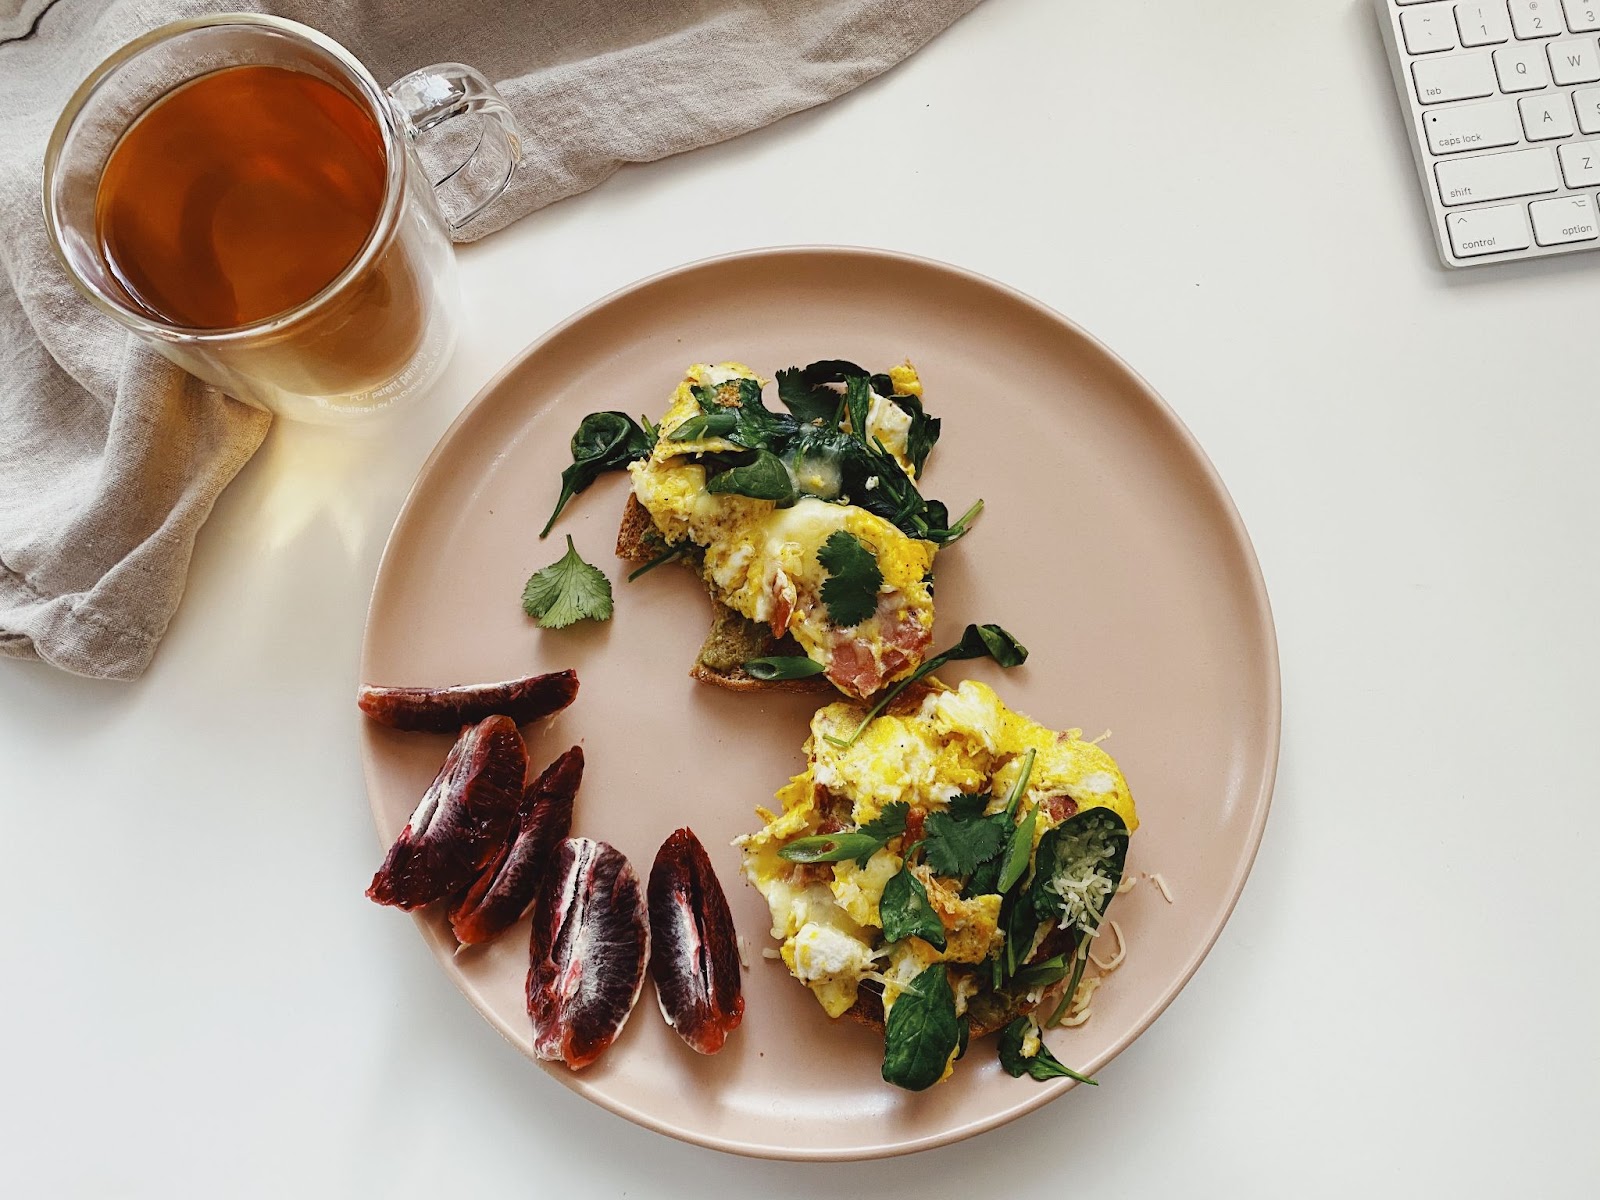 Pink plate with avocado toast on English muffin, topped with scrambled eggs, spinach, and turkey bacon. A cup of tea on the side.